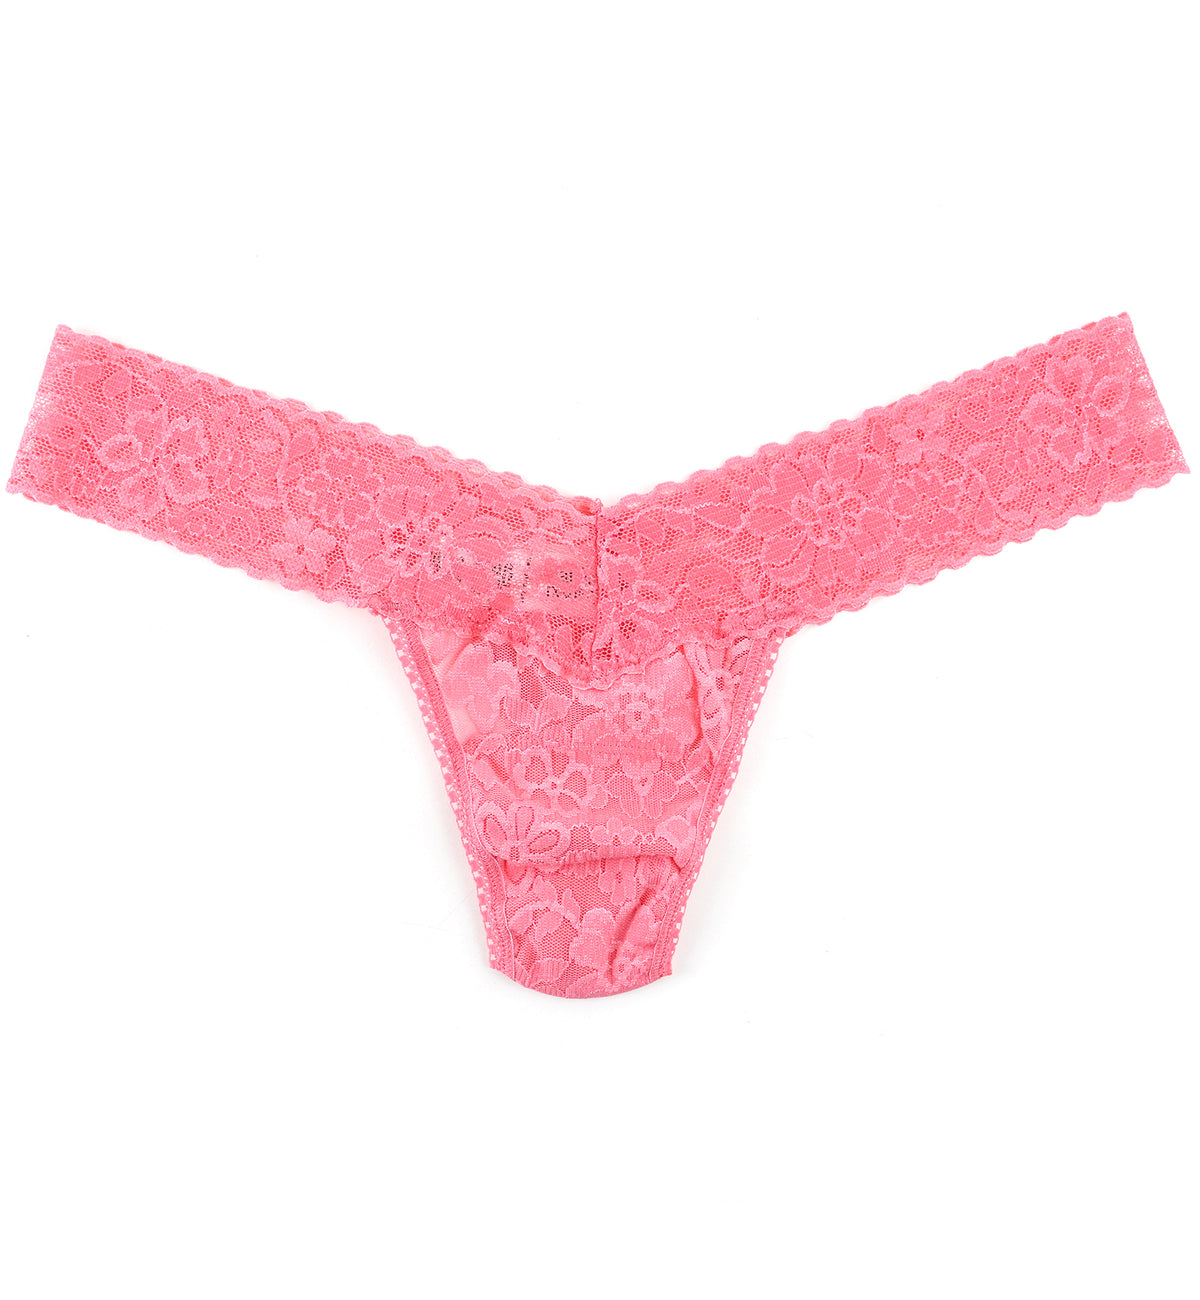 Hanky Panky Daily Lace Low Rise Thong (771001P),Dahlia - Dahlia,One Size